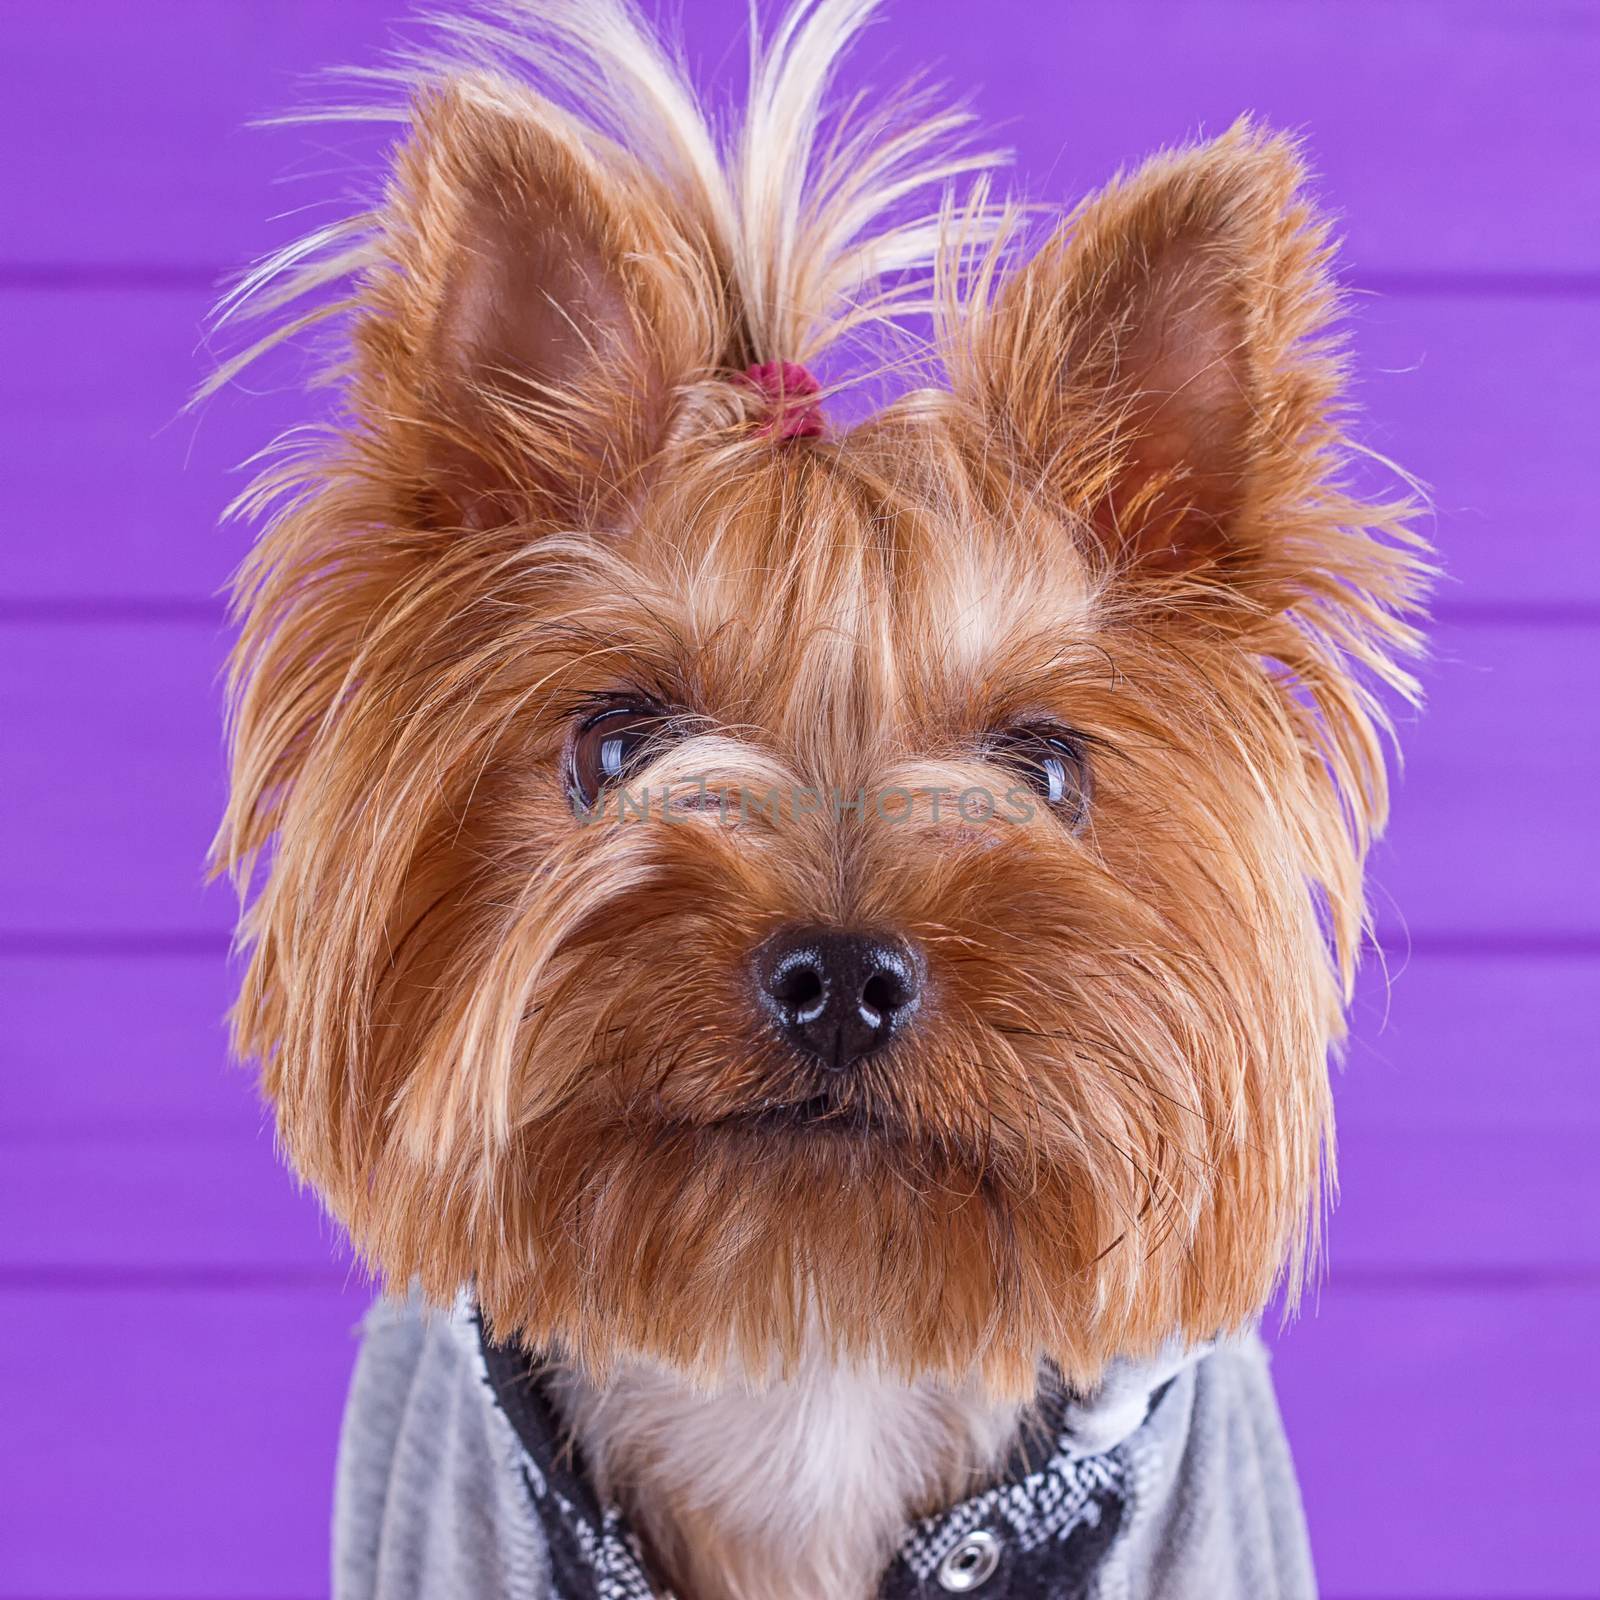 Funny Yorkshire Terrier in overall staying on purple background